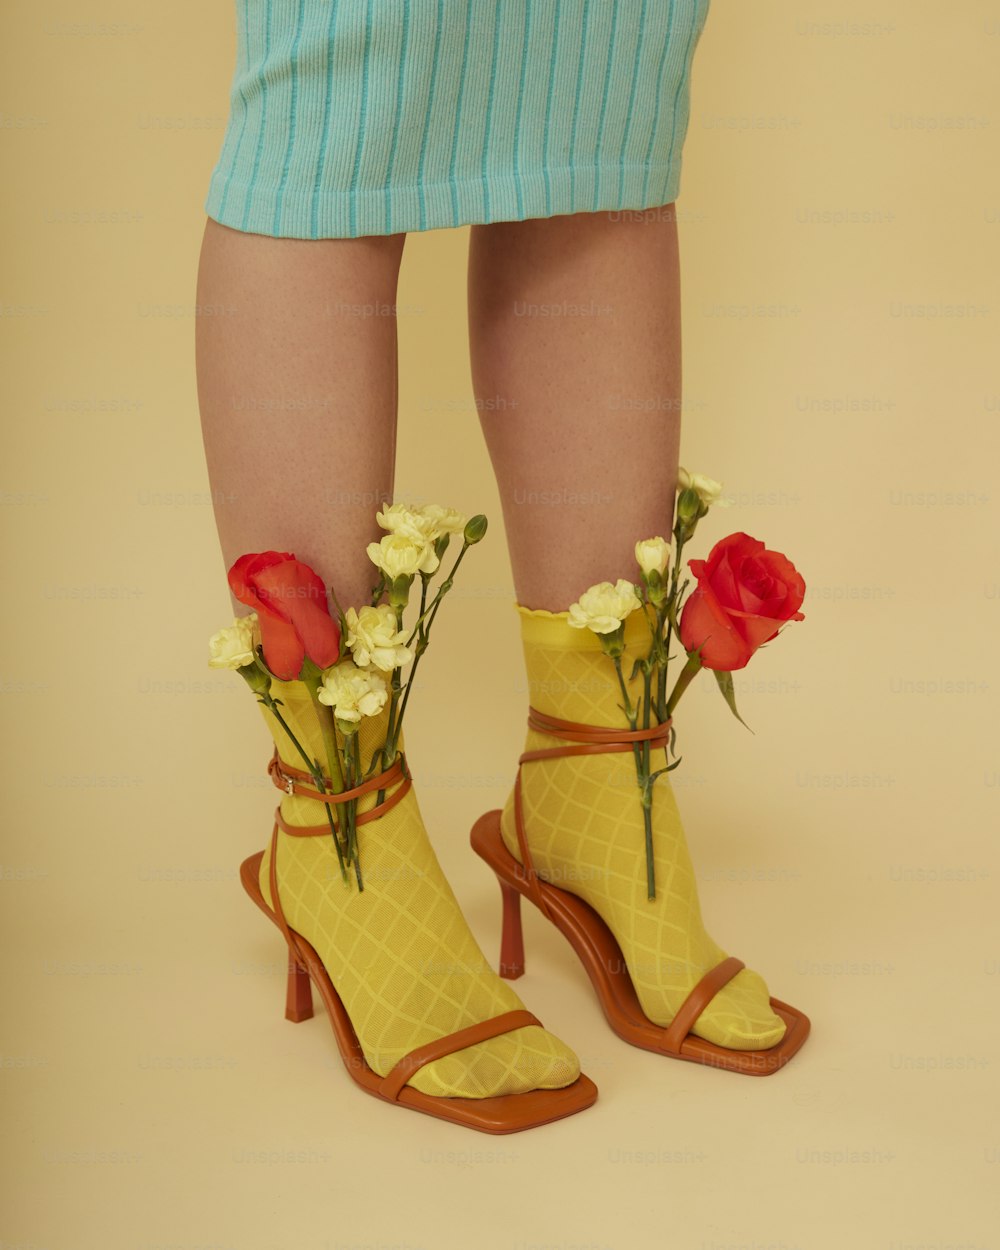 a woman's legs wearing yellow shoes with flowers in them photo – Flower  arrangement Image on Unsplash